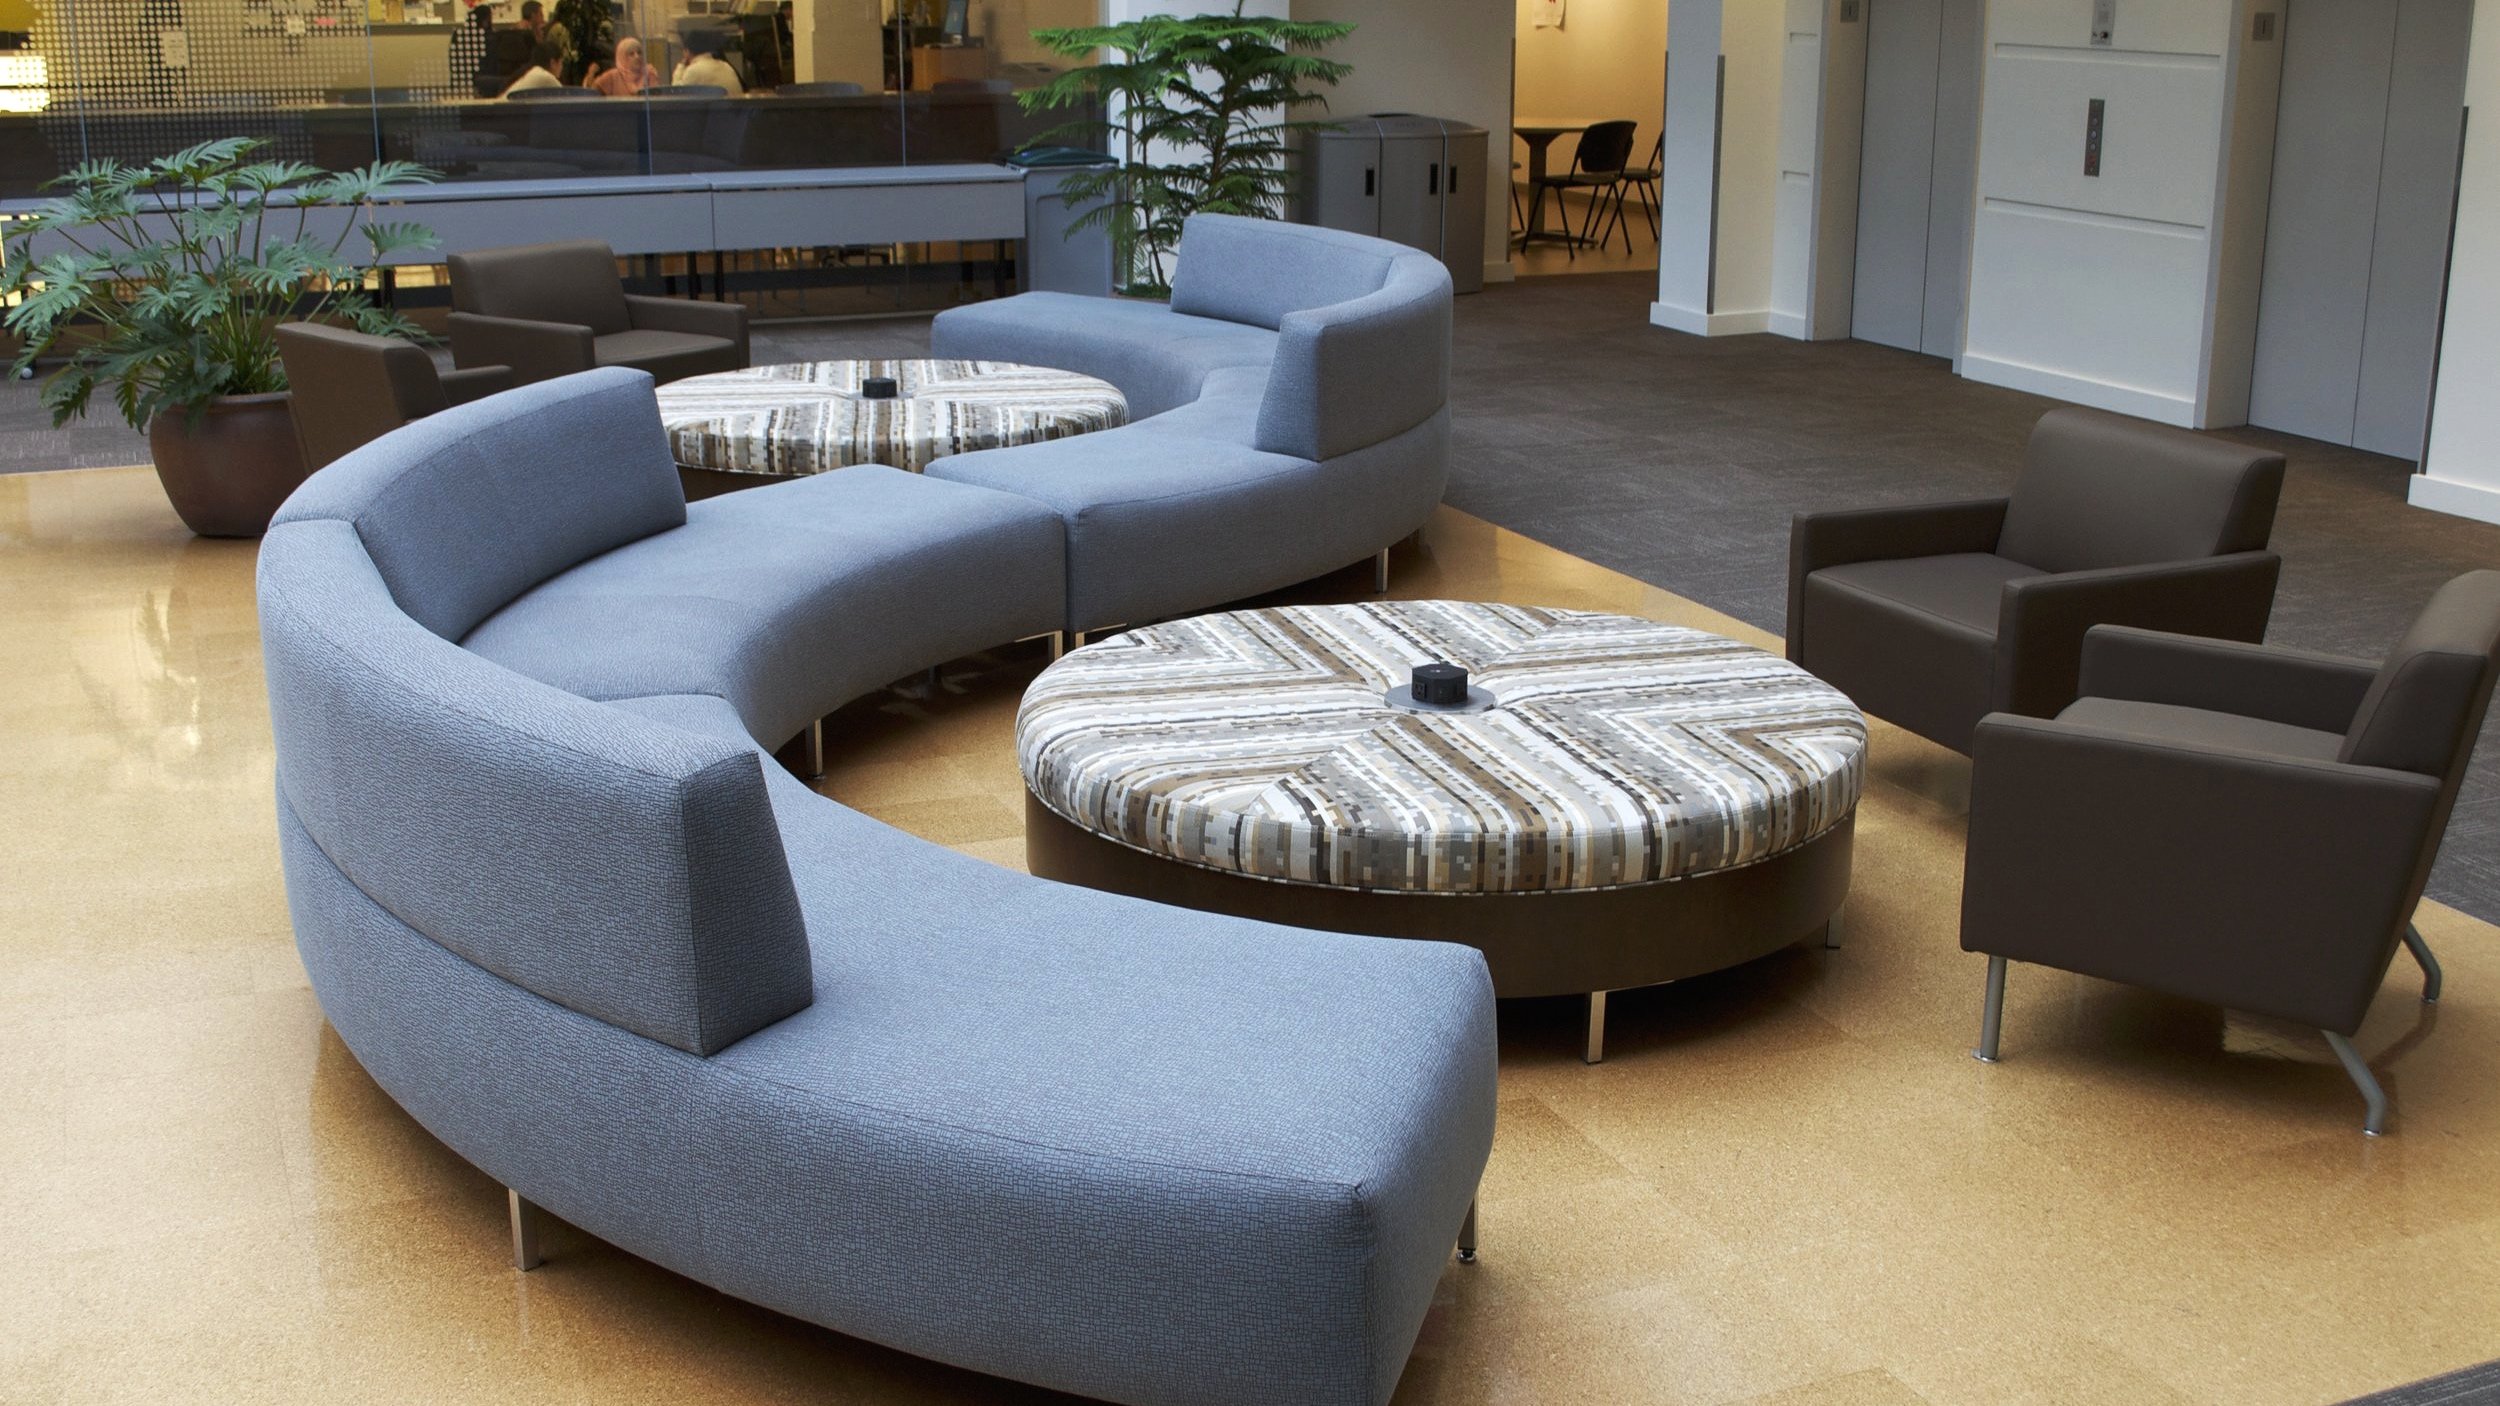 CUSTOM KENZIE LOUNGE SEATING + OVERSIZED OTTOMANS WITH INTEGRATED DATA UNITS